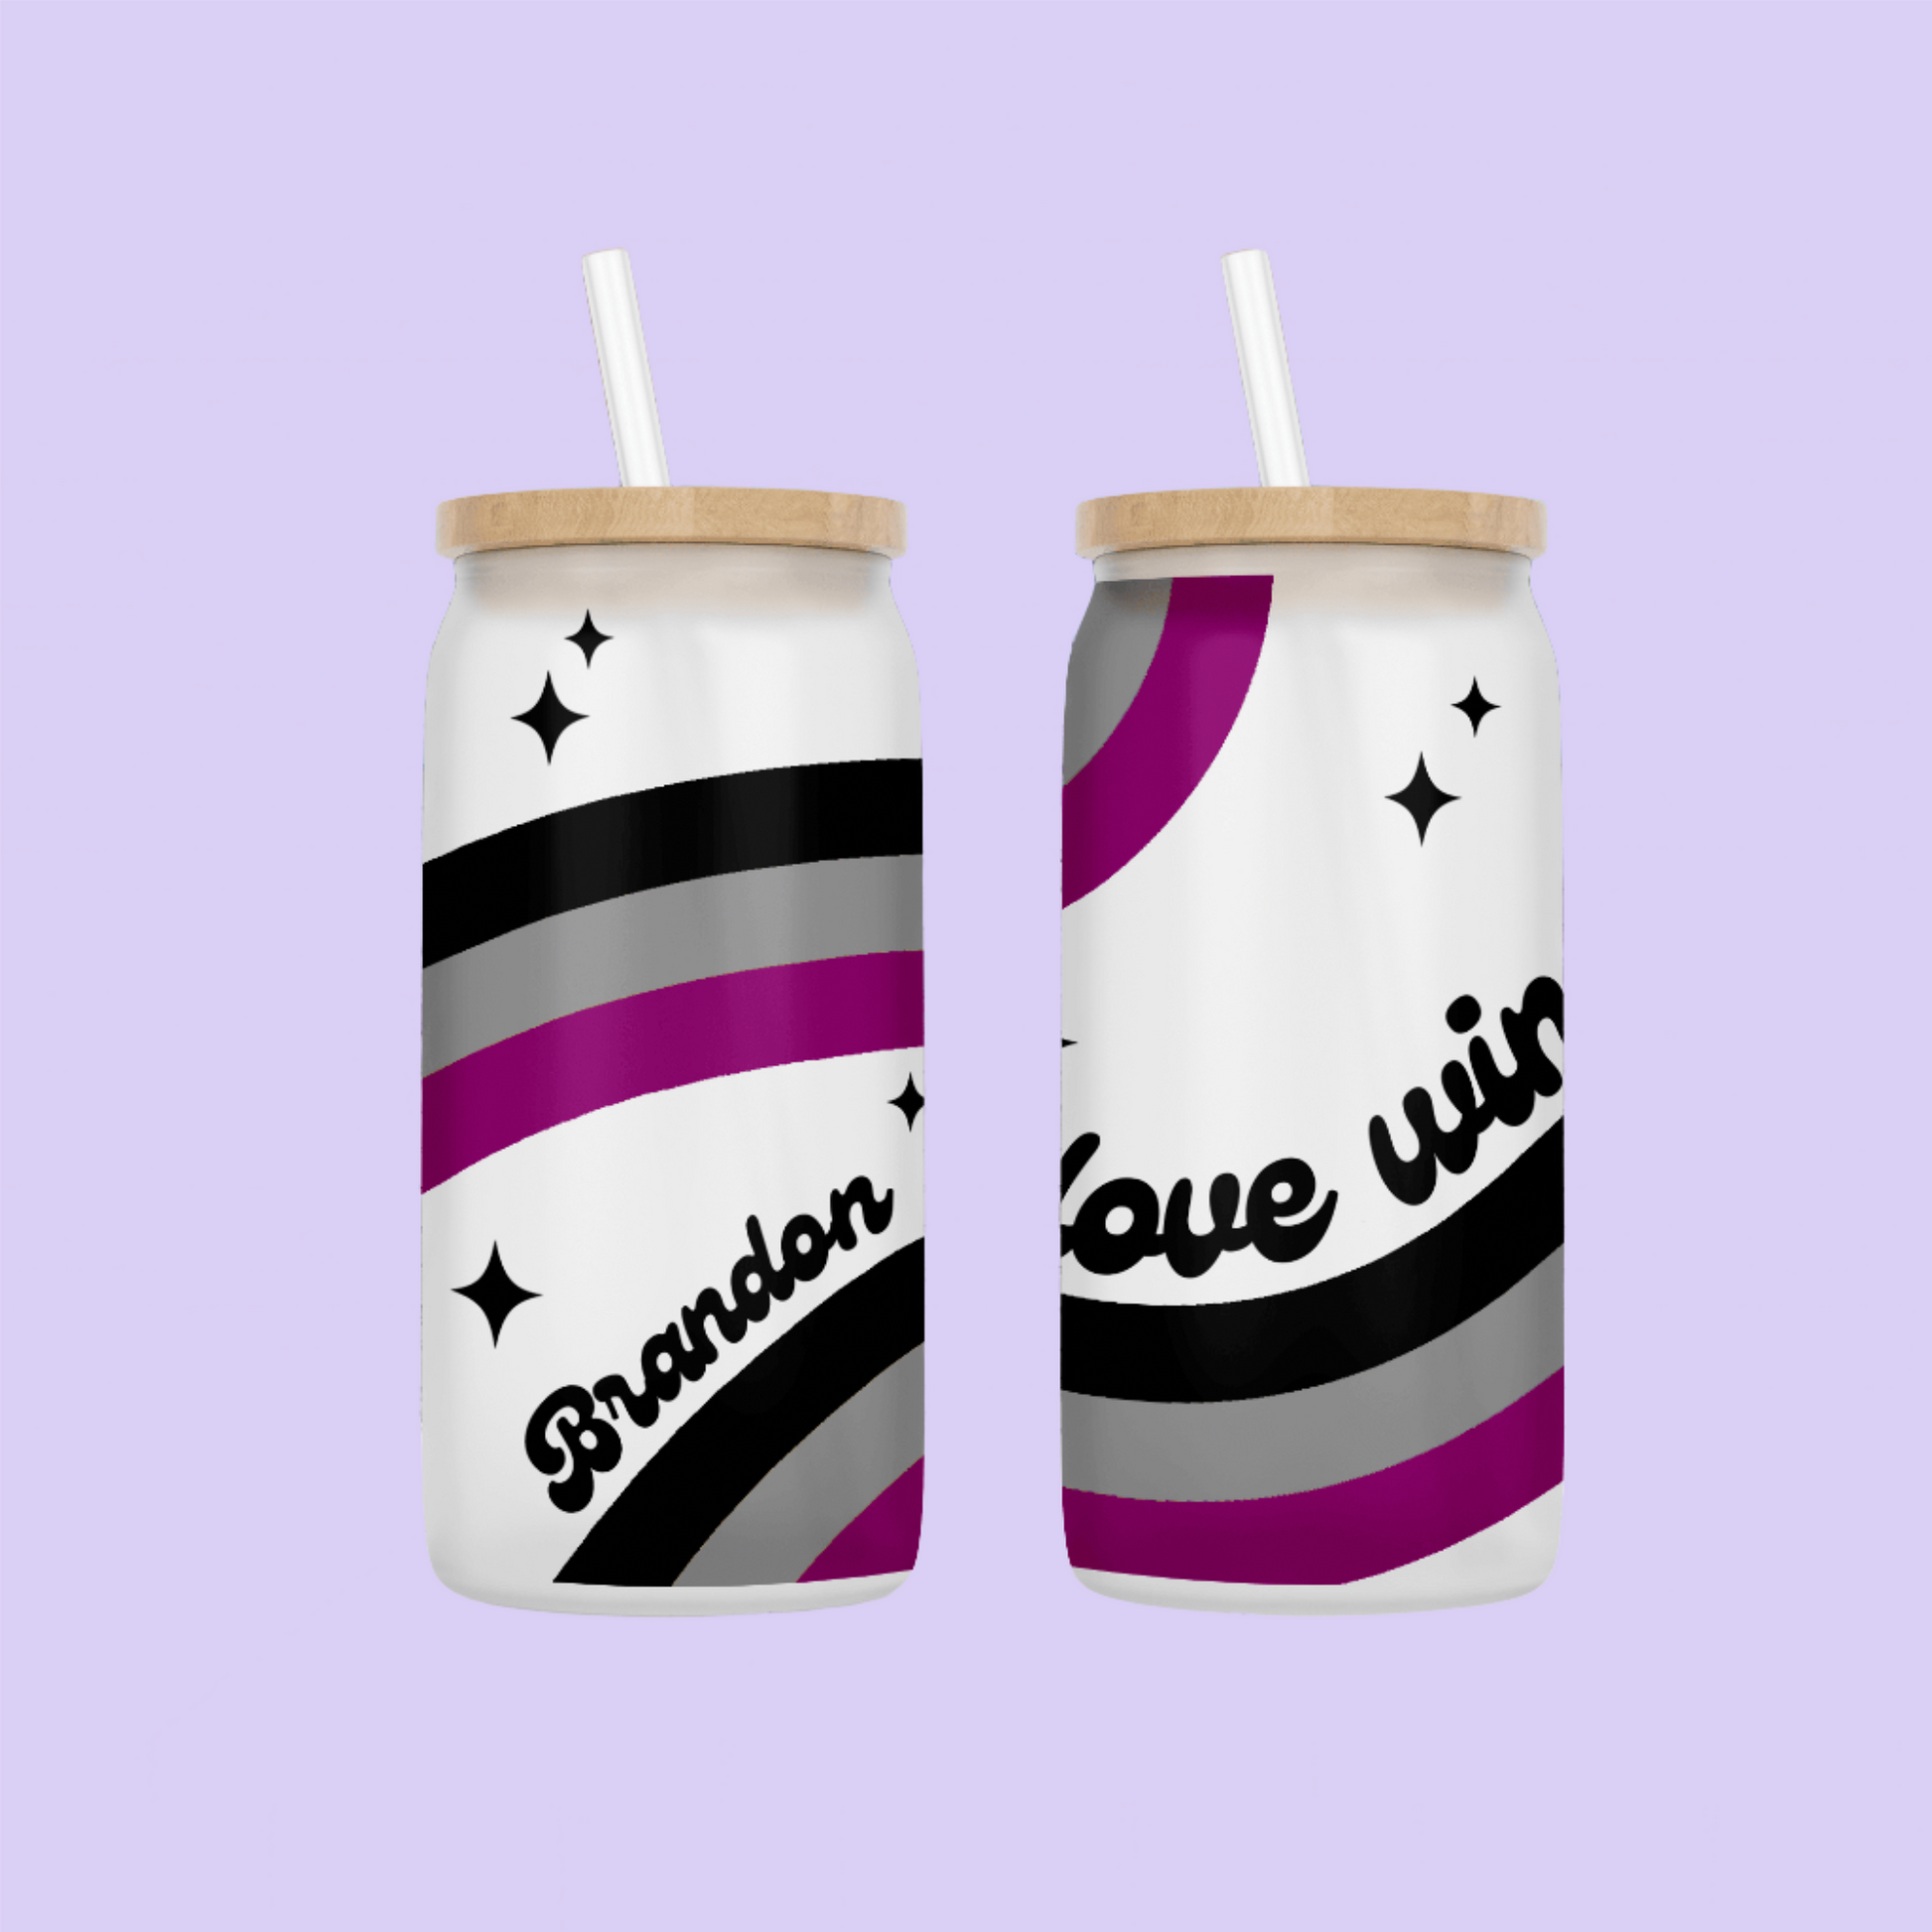 Demisexual & Asexual Flag "Love Wins" Drinking Glass - Two Crafty Gays